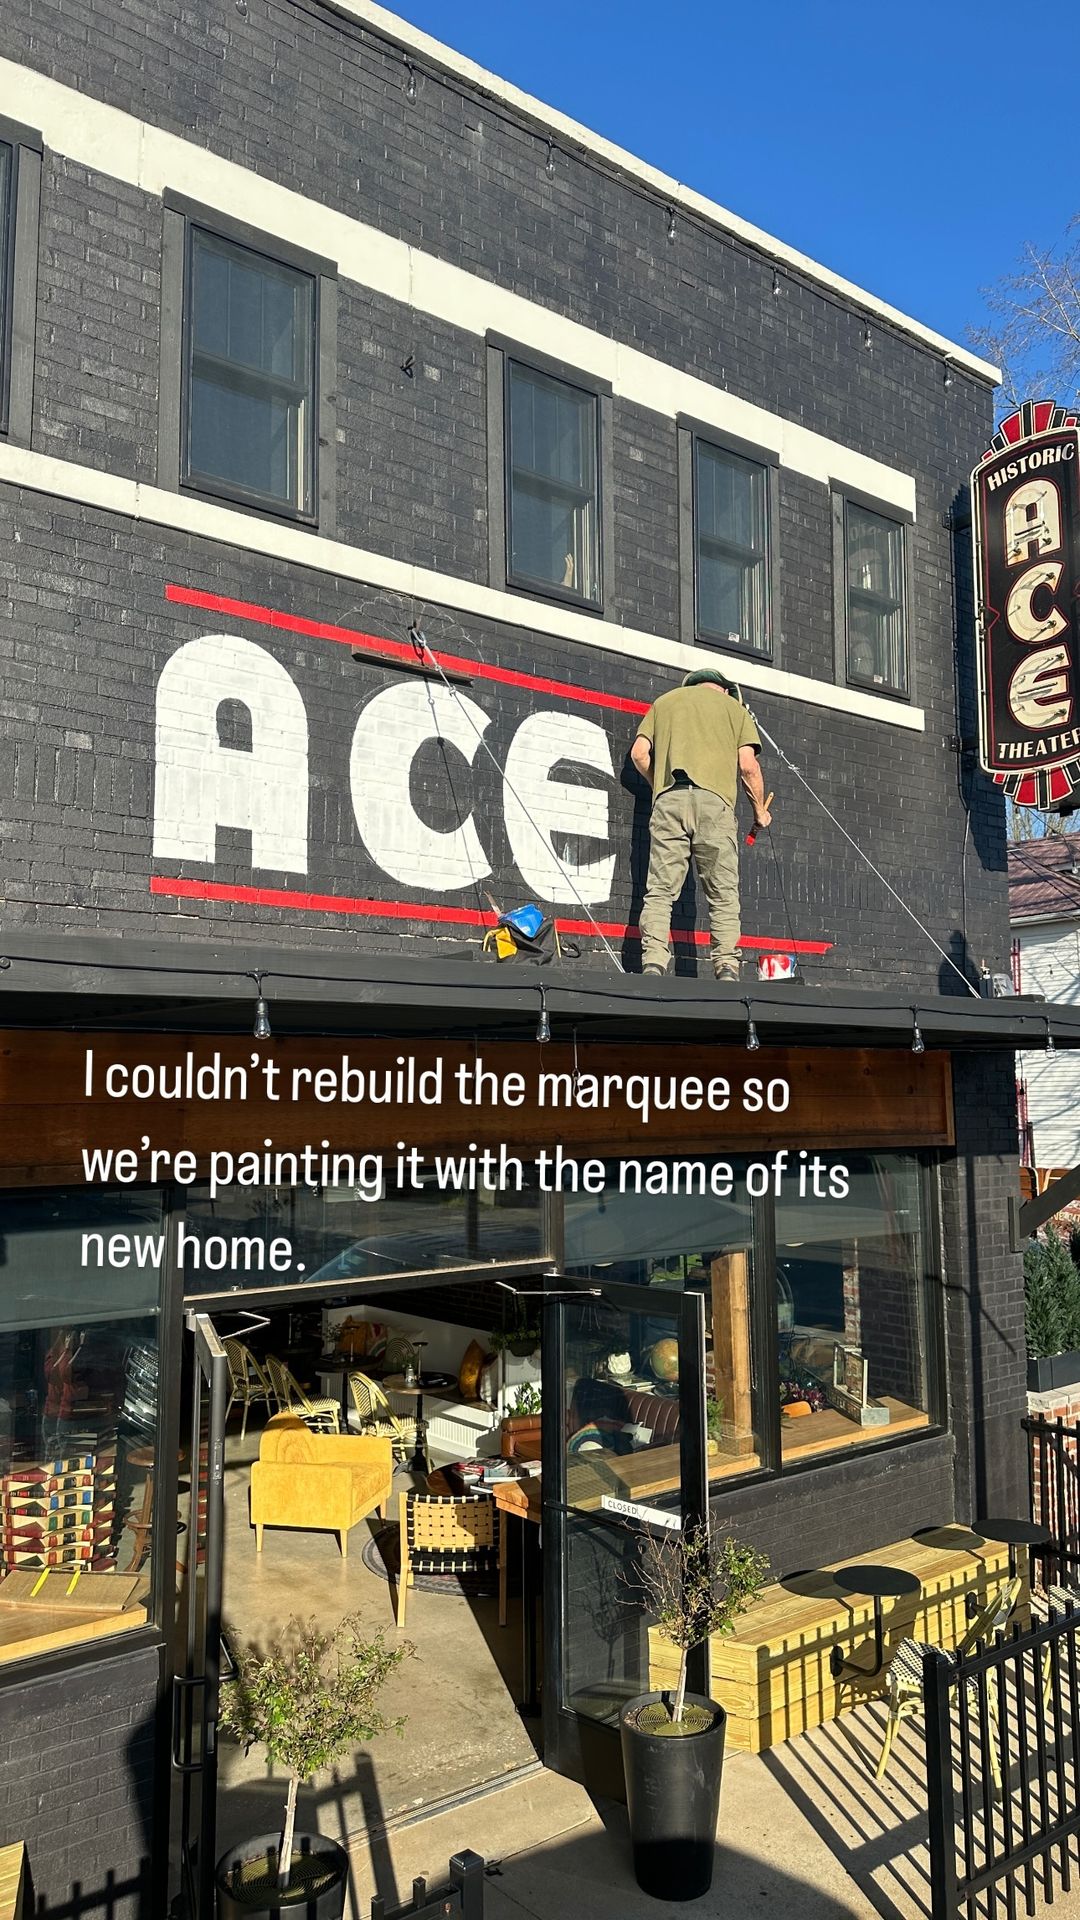 Leticia showed off the paint job for Ace Coffee Cafe's sign